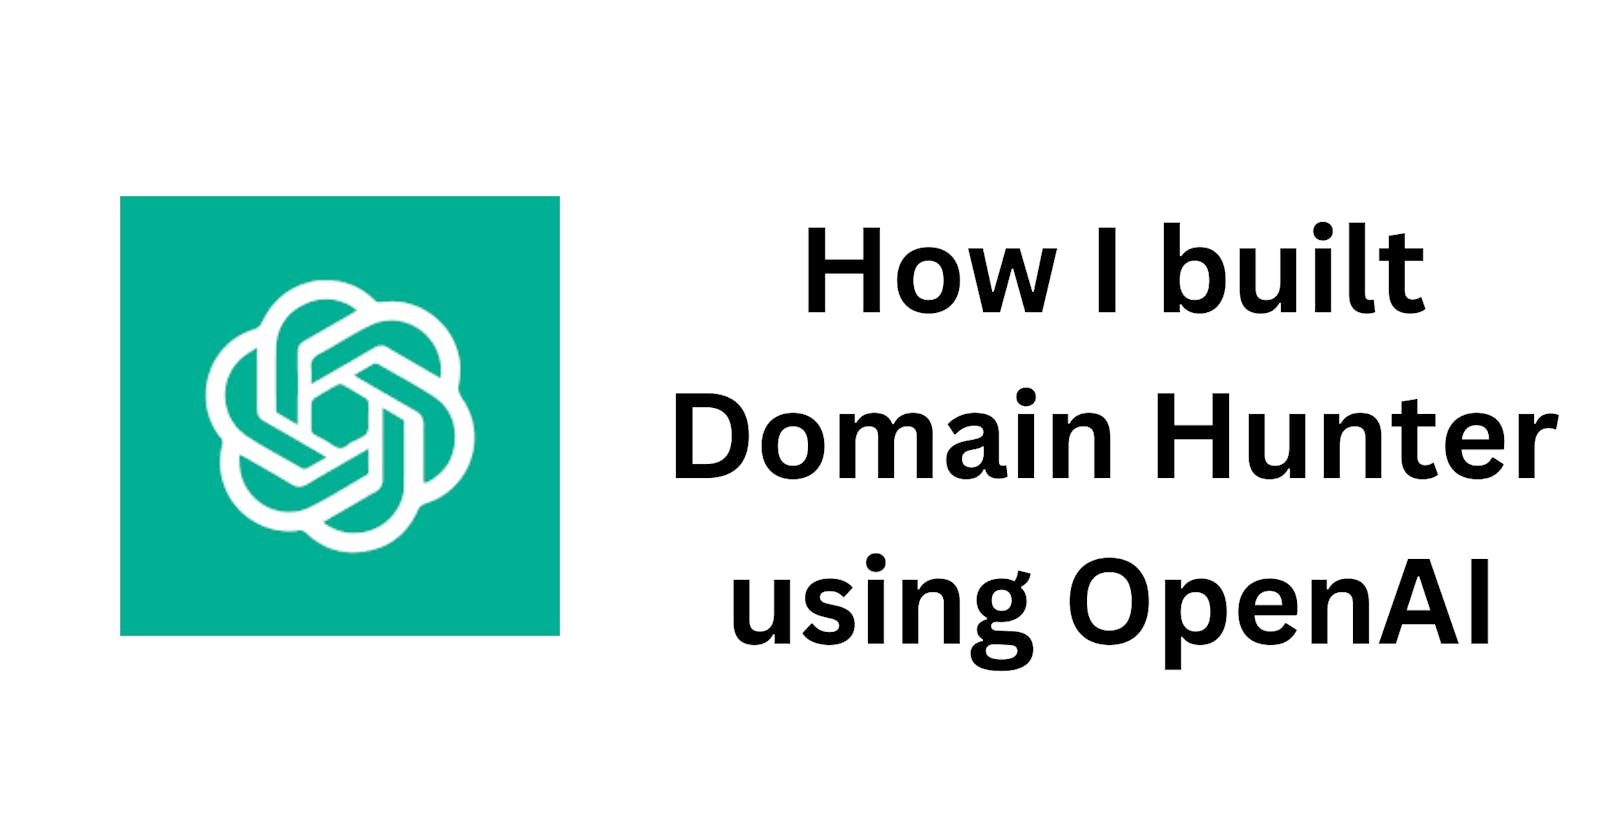 How I built domain hunter using OpenAI on a weekend